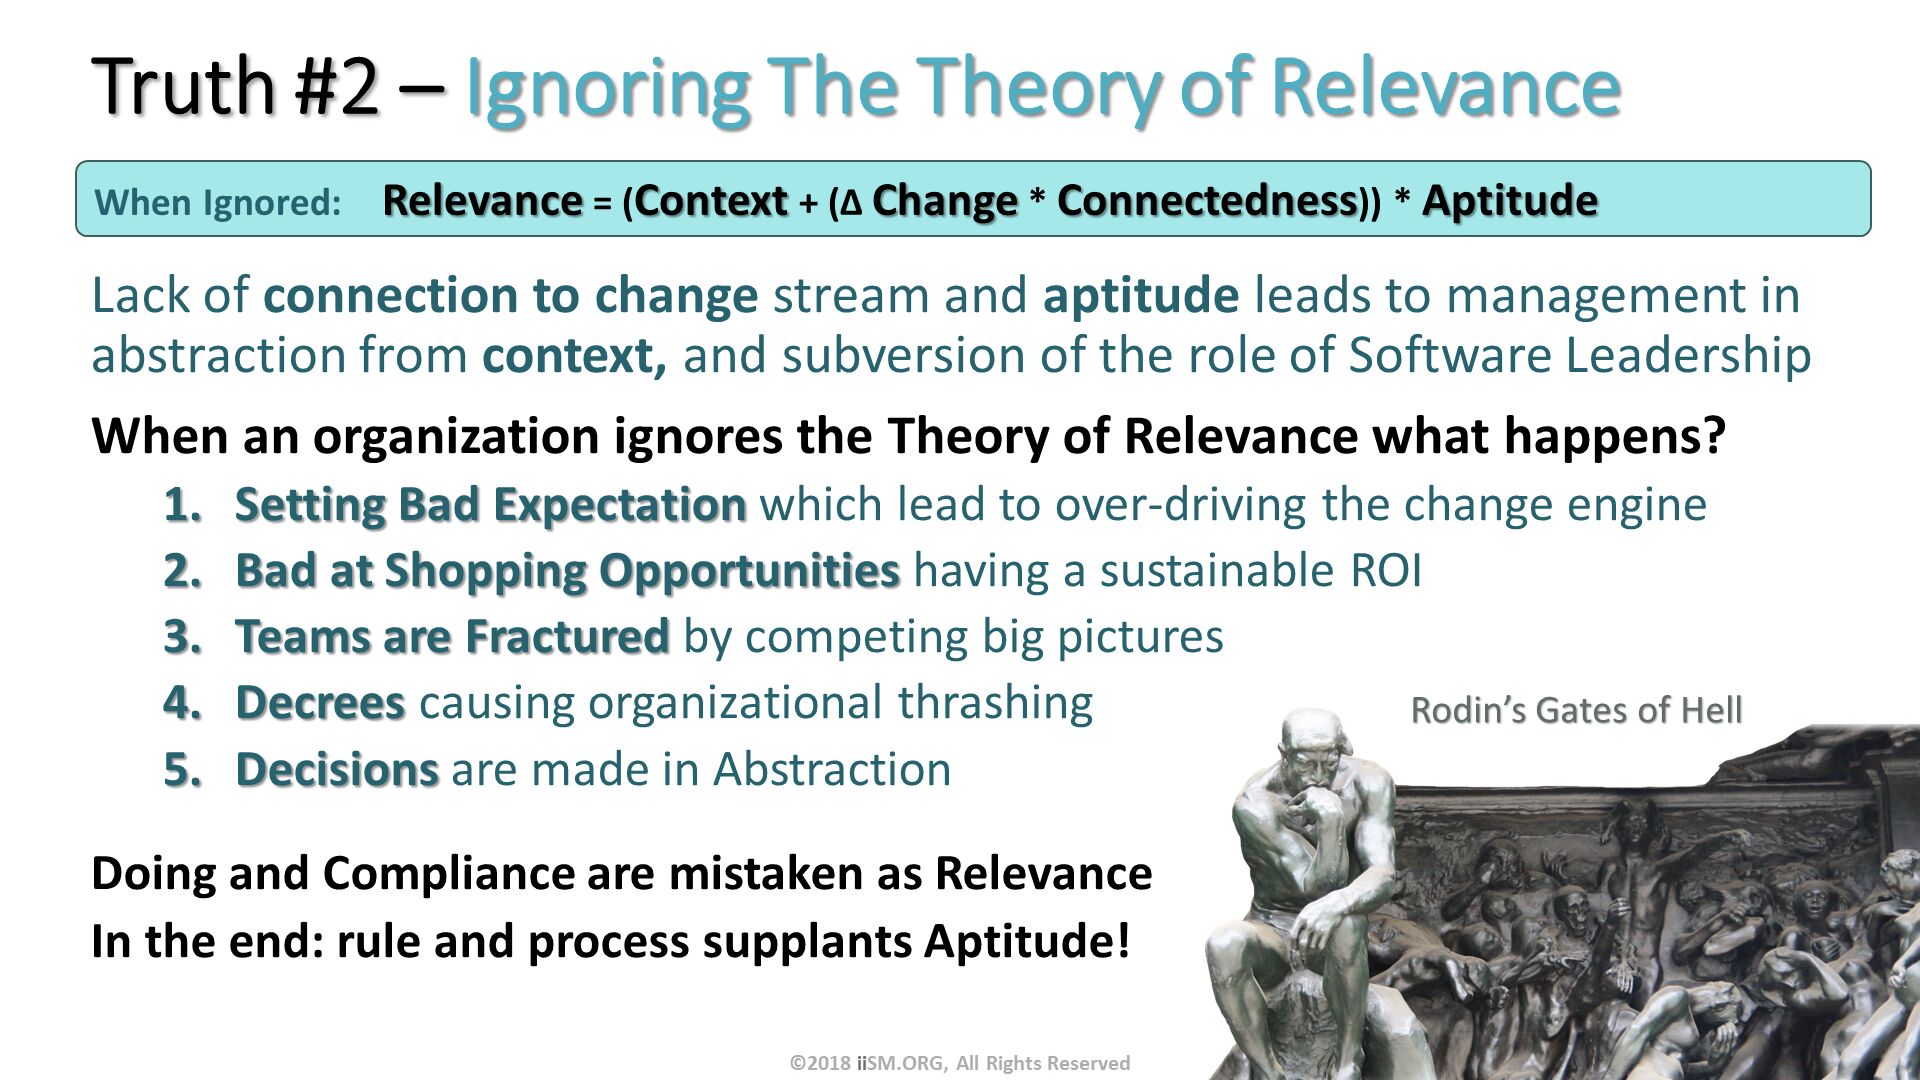 Truth #2 – Ignoring The Theory of Relevance . Lack of connection to change stream and aptitude leads to management in abstraction from context, and subversion of the role of Software Leadership
When an organization ignores the Theory of Relevance what happens?
Setting Bad Expectation which lead to over-driving the change engine
Bad at Shopping Opportunities having a sustainable ROI
Teams are Fractured by competing big pictures
Decrees causing organizational thrashing
Decisions are made in Abstraction
Doing and Compliance are mistaken as Relevance
In the end: rule and process supplants Aptitude!
. When Ignored:	Relevance = (Context + (∆ Change * Connectedness)) * Aptitude . ©2018 iiSM.ORG, All Rights Reserved. 